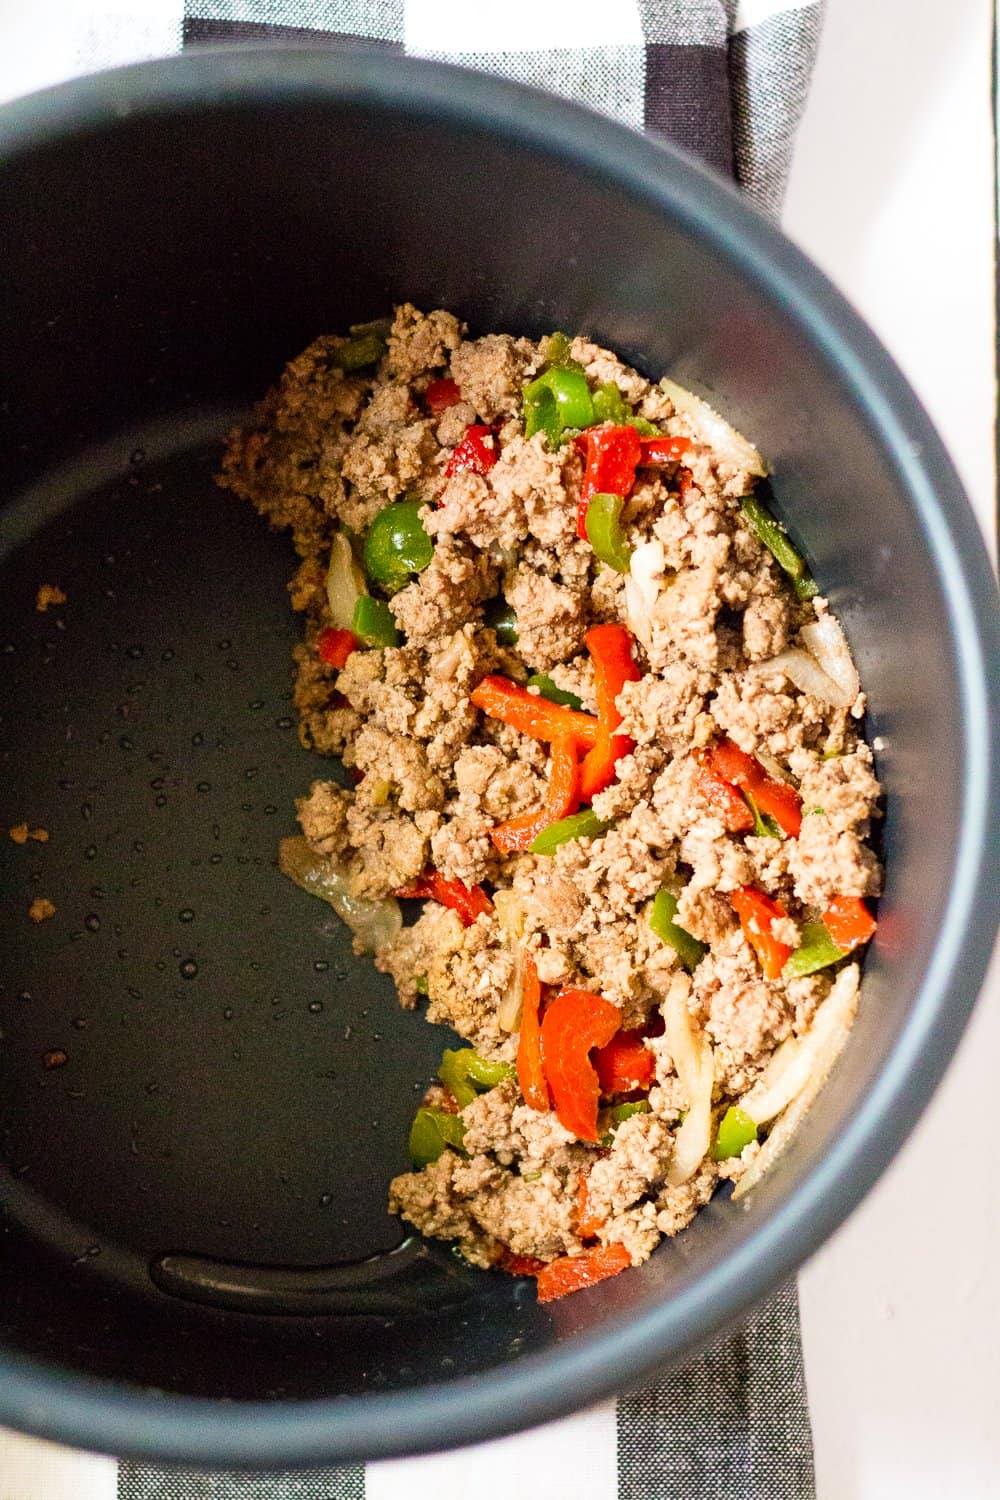 fully cooked ground beef, peppers and onions in the bottom of an instant pot insert.